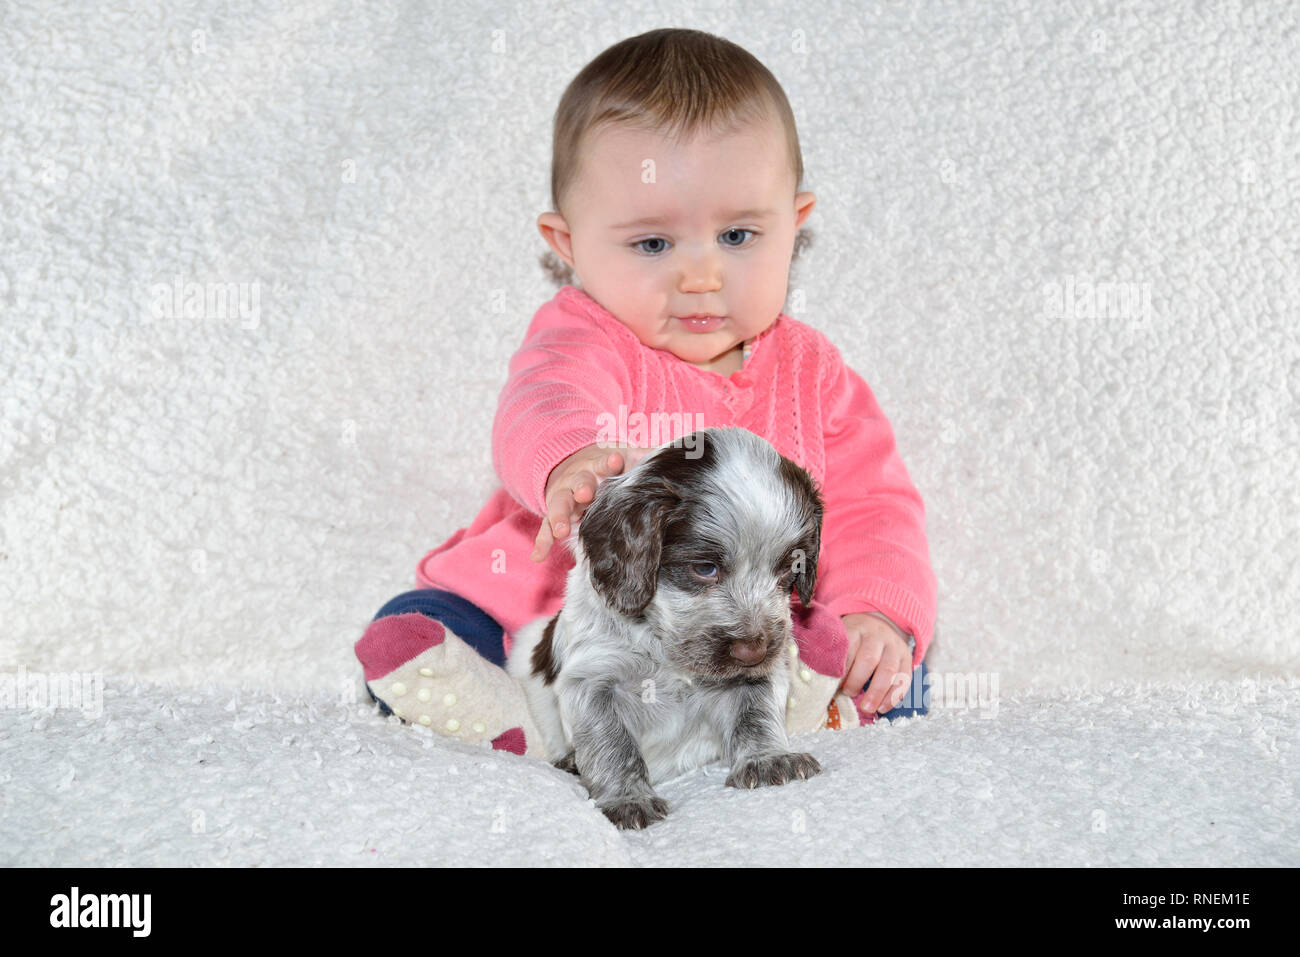 7 month baby girl with young sprocker spaniel puppy dog Stock Photo